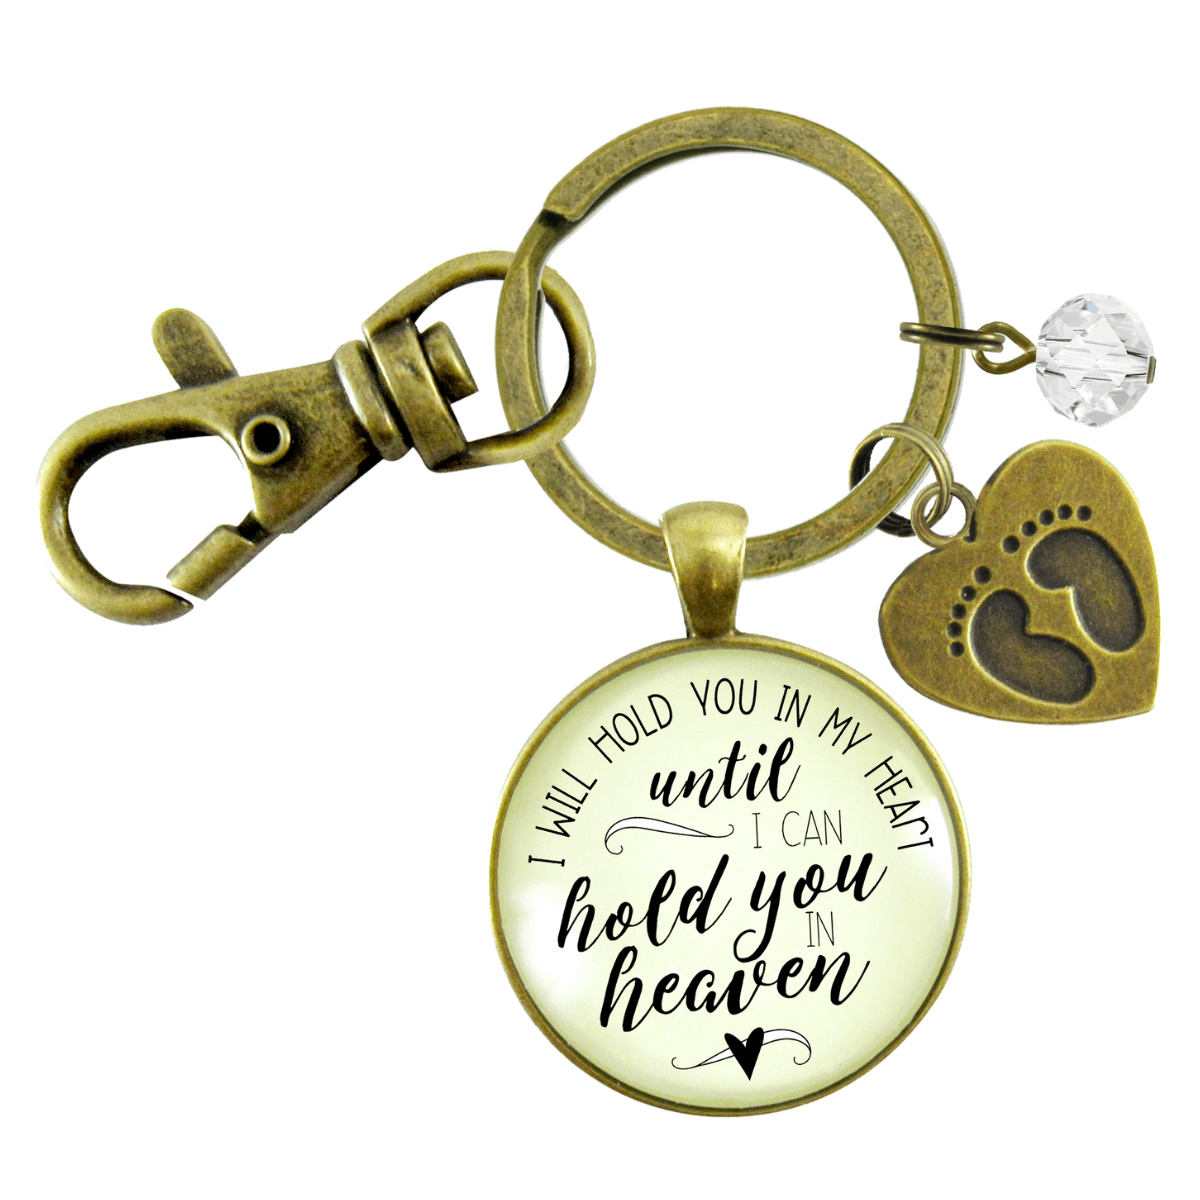 Miscarriage Keychain I Will Hold You in My Heart Memorial Key Ring Baby Feet Gift For Mom Dad - Gutsy Goodness